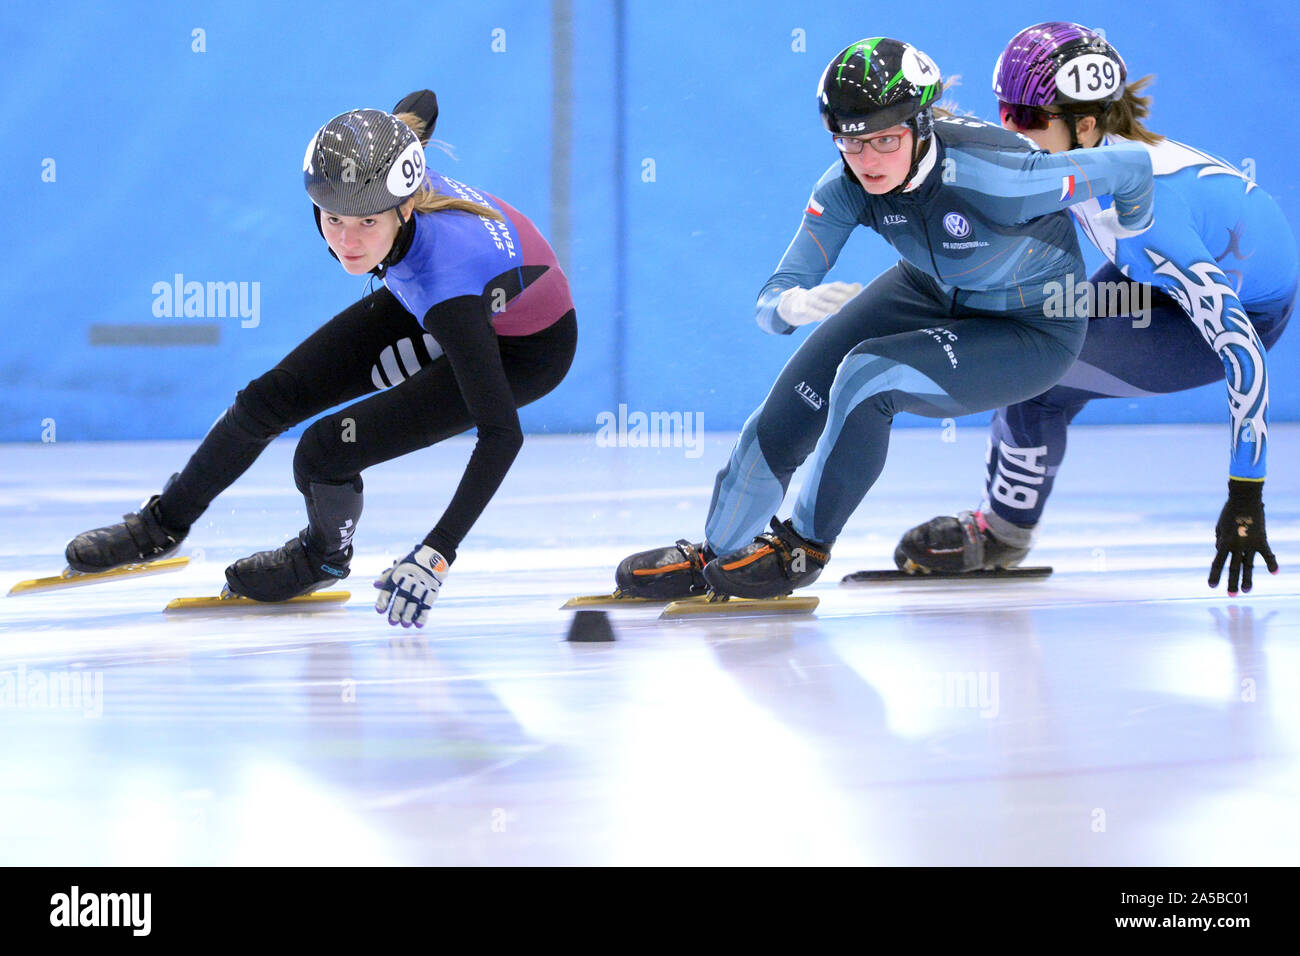 Benatky Nad Jizerou, Czech Republic. 19th Oct, 2019. Speed skaters JANKOVSKA Laura of Latvia (99), KUDLACKOVA Kristyna of Czech Republic (47) and BOBIER Oliwia of Poland (139) competes during the ISU Danubia Series 1 at Czech Open in Benatky nad Jizerou (30 kilometers north of Prague) in the Czech republic, October 19, 2019.Short track speed skating starting to play sports by children and adults in the Czech Republic. Short track speed skating is a form of competitive ice speed skating. In competitions, multiple skatersskate on an oval ice track with a circumference of 111.12 m. Credit: ZUMA P Stock Photo